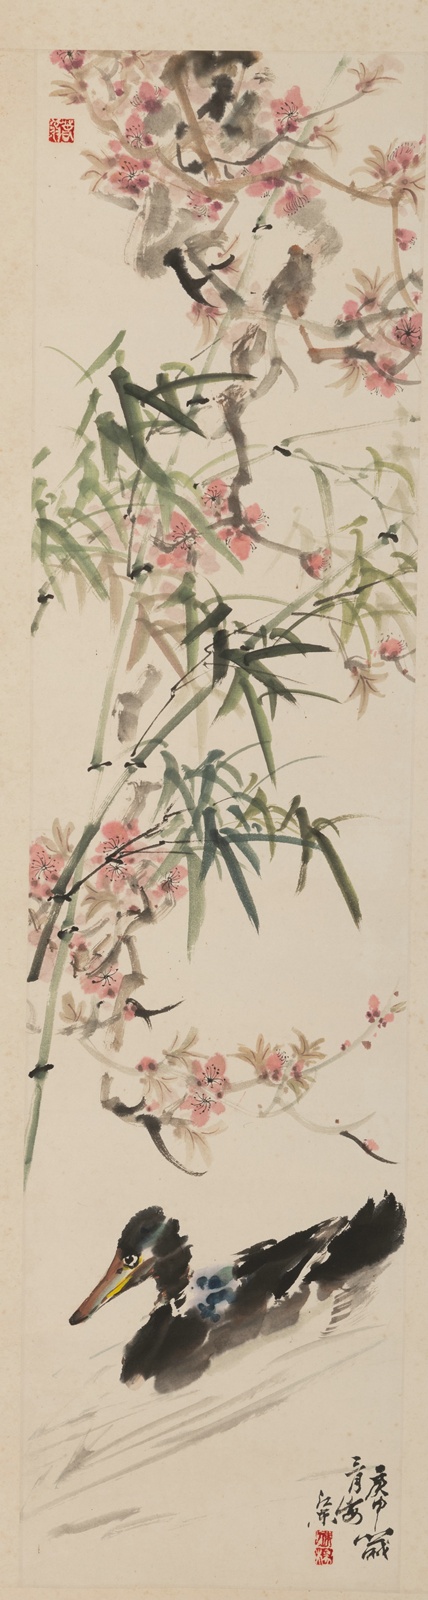 <b>TWO PAINTINGS ON PAPER: TWO FLYING CRANES OVER A PINE TREE AND A SWIMMING DUCK UNDER BAMBOO AND A BLOSSOMING PEACH TREE</b>